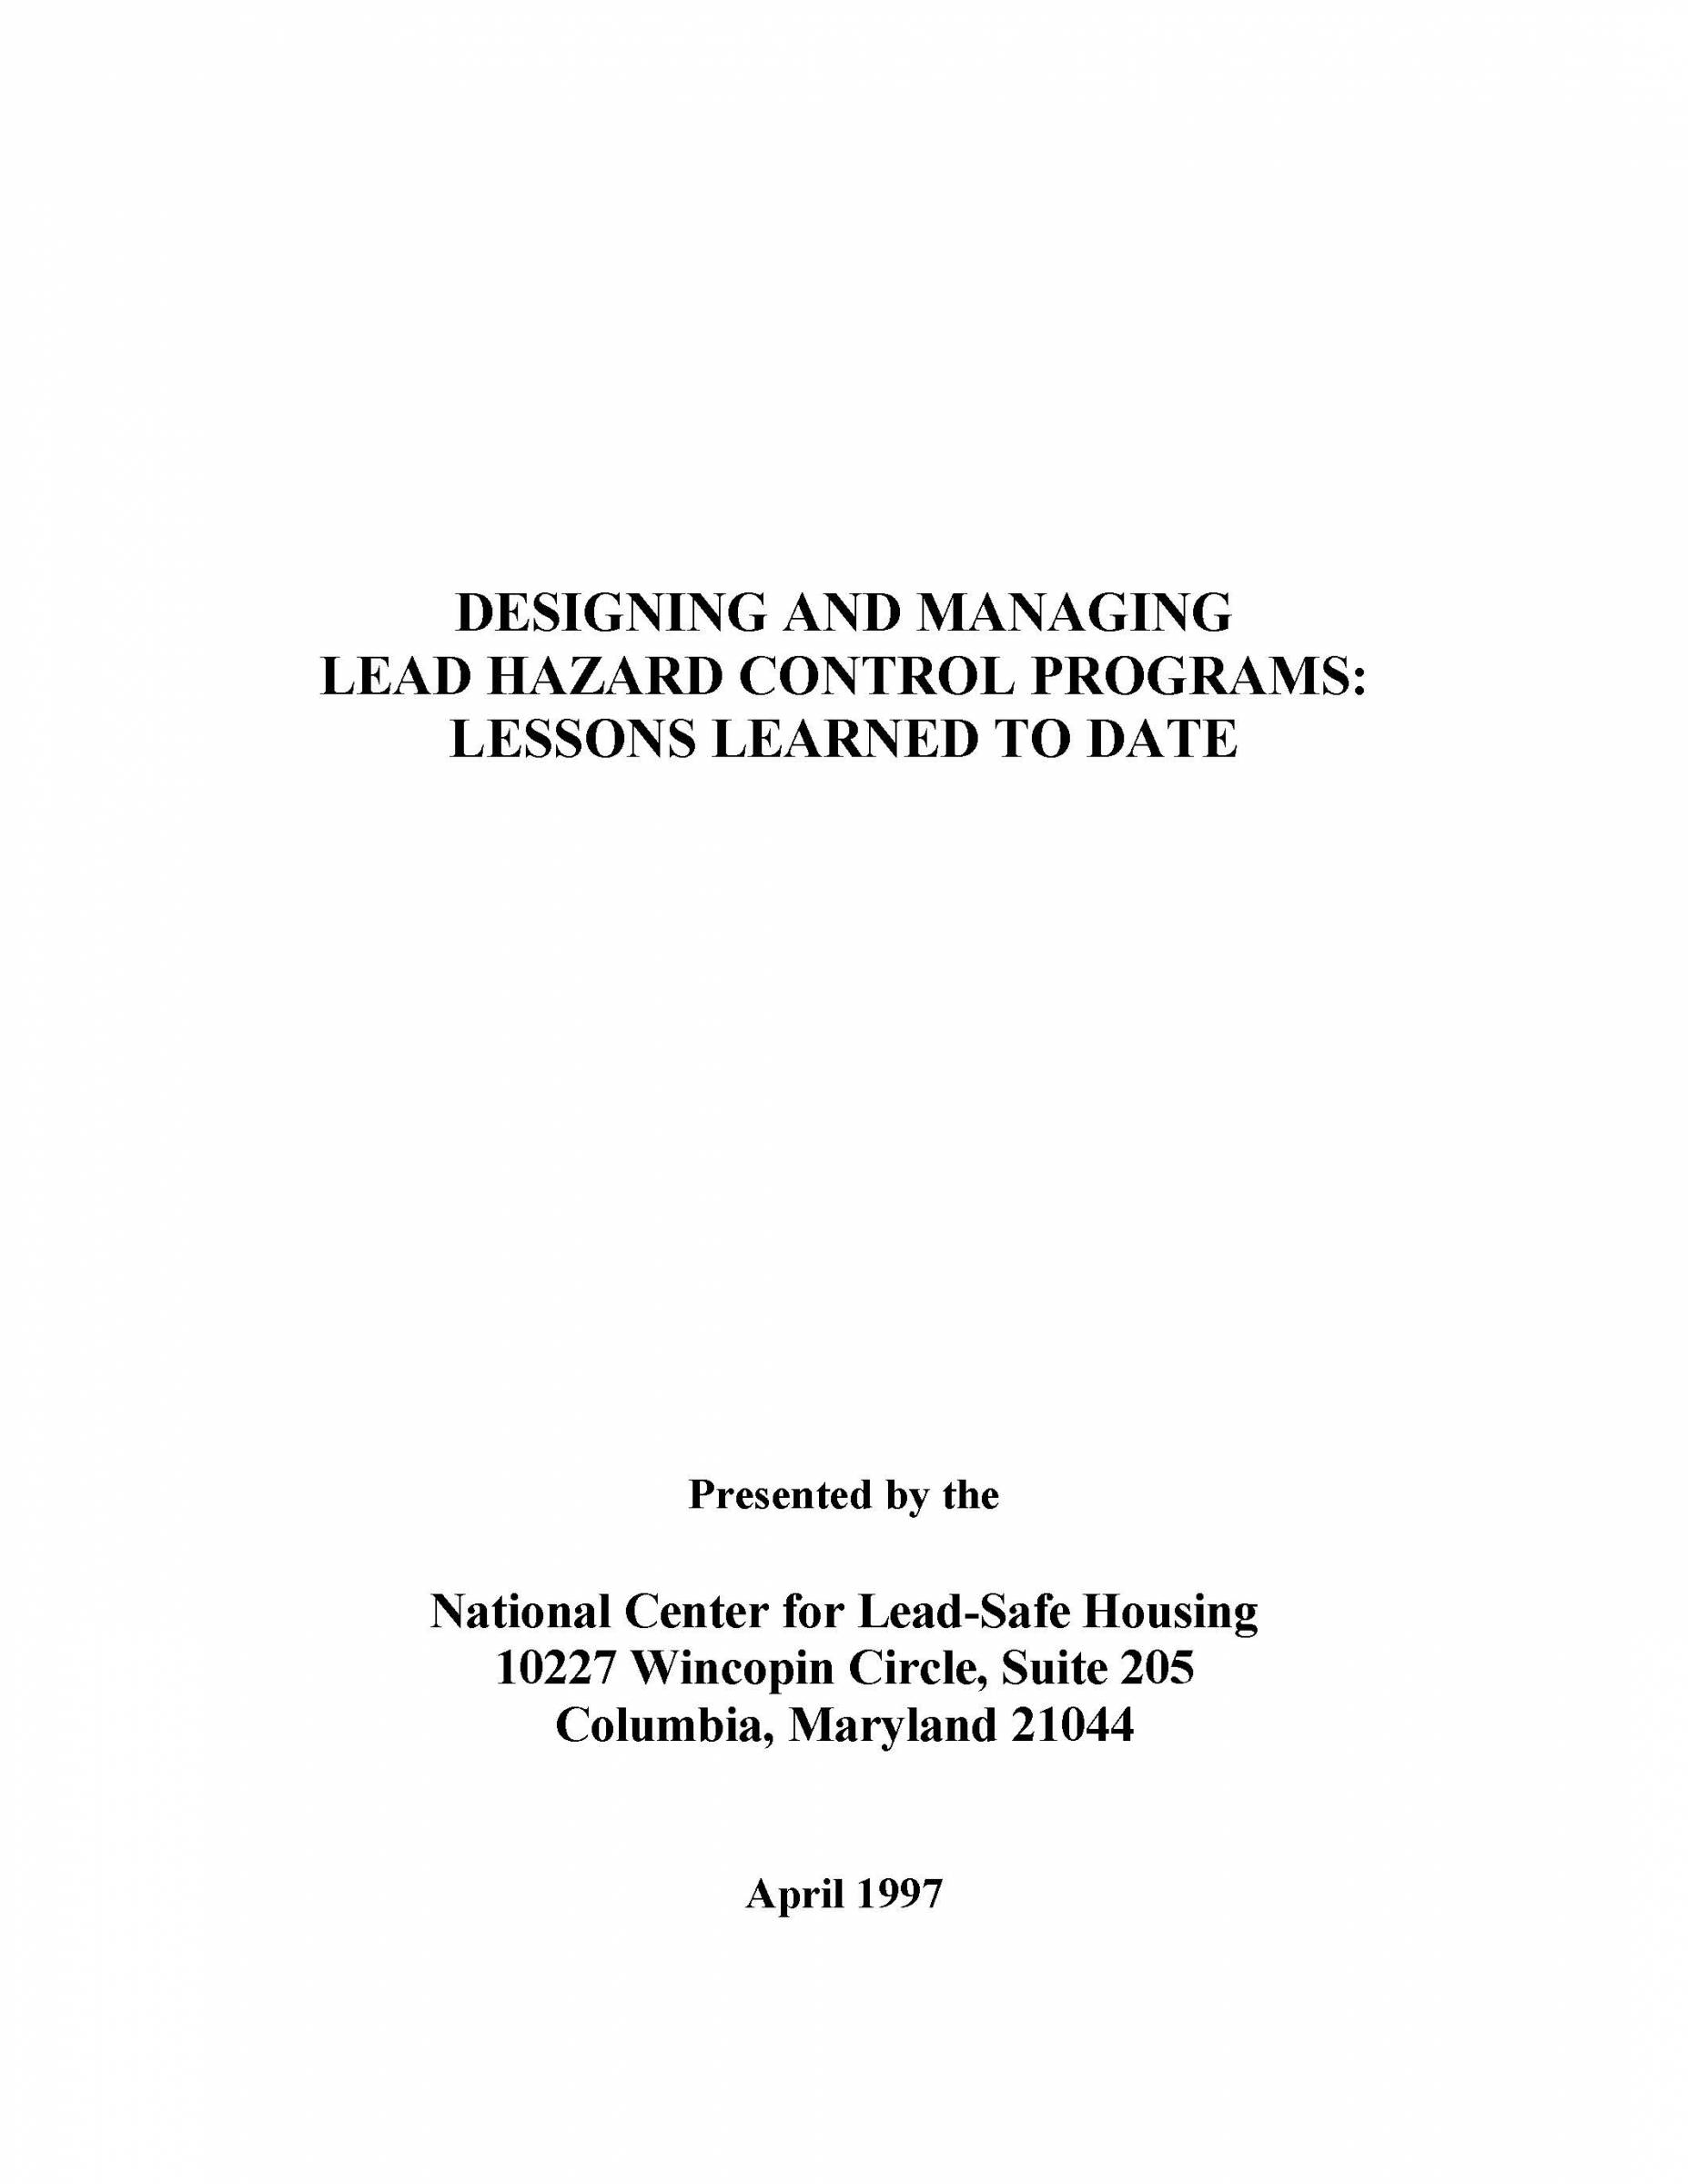 Designing and Managing Lead Hazard Control Programs: Lessons Learned to Date